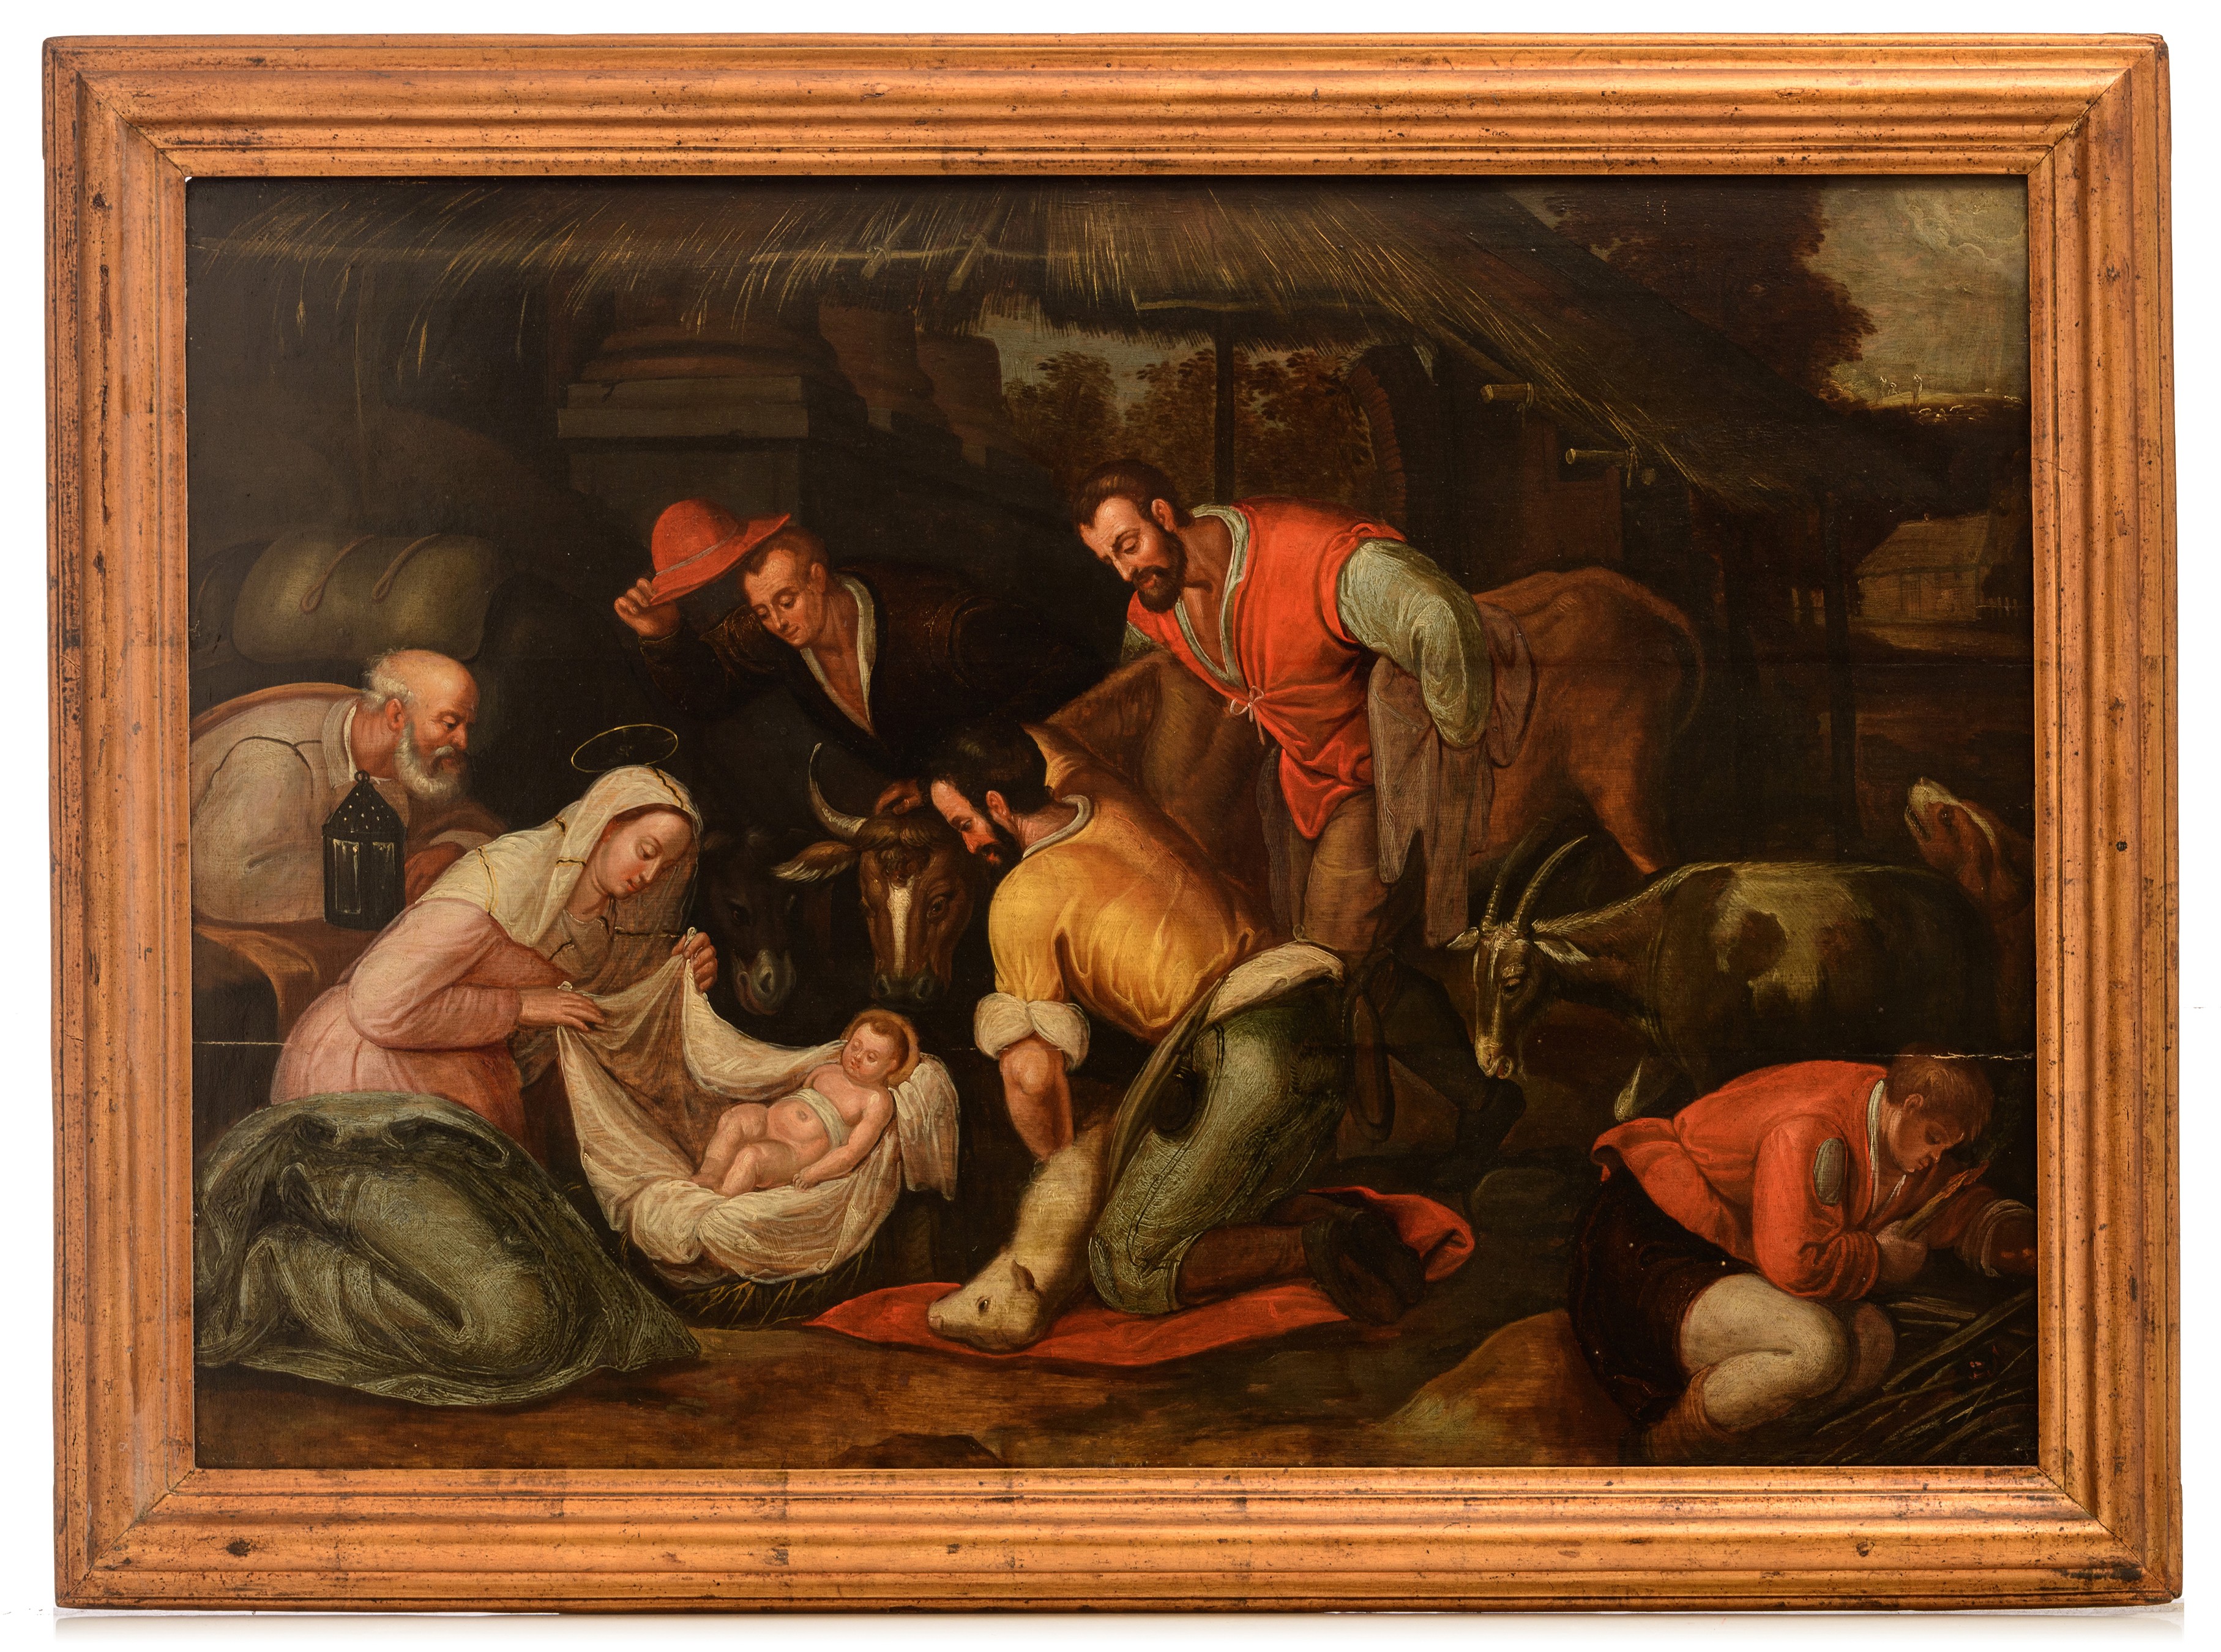 The adoration of the shepherds, late Antwerp Mannerism, 17thC, oil on panel, 74 x 105 cm - Image 2 of 8